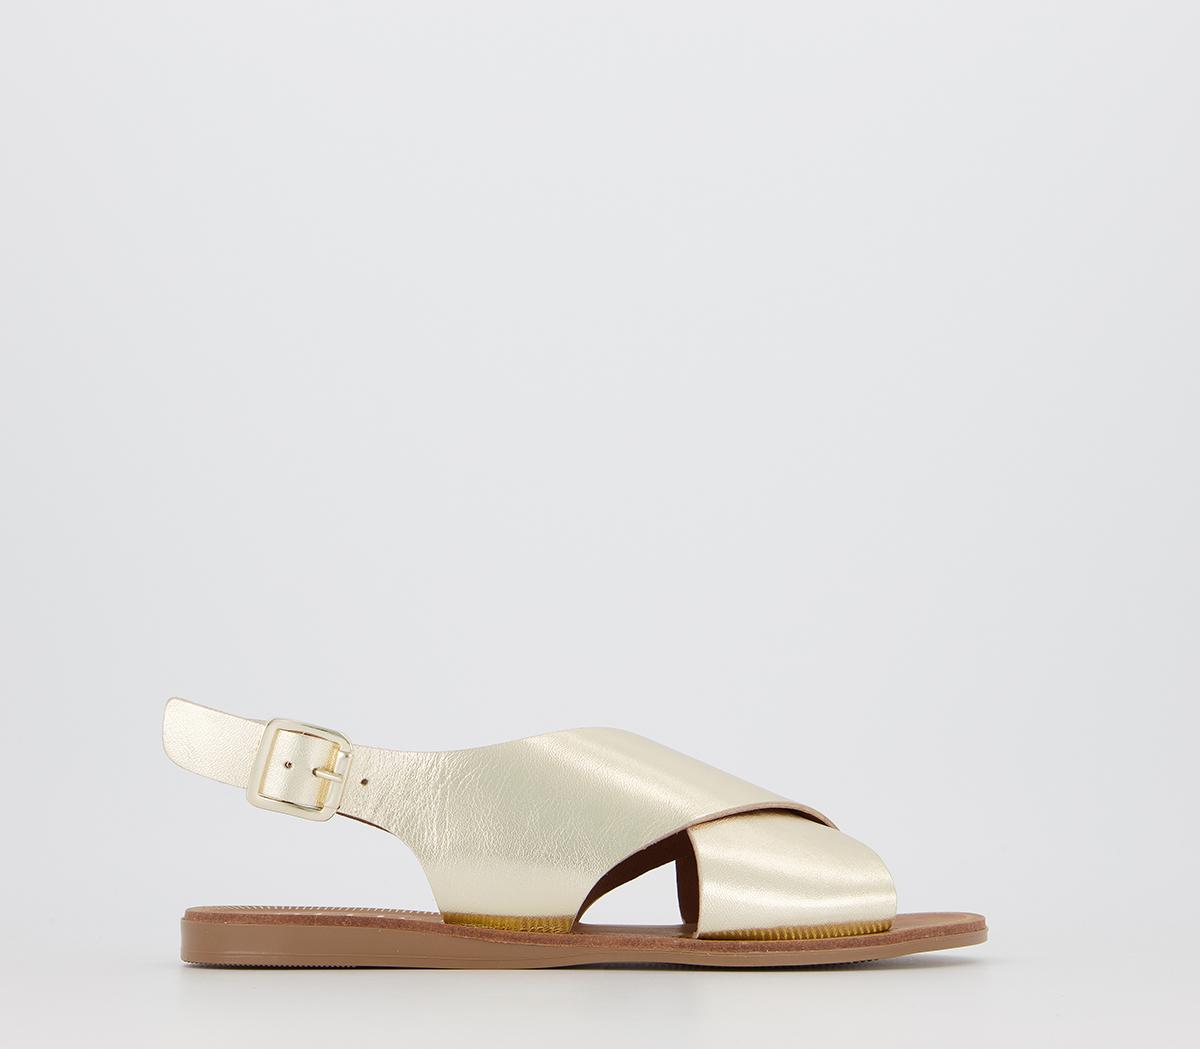 OFFICESeychelles Cross Strap SandalsGold Leather